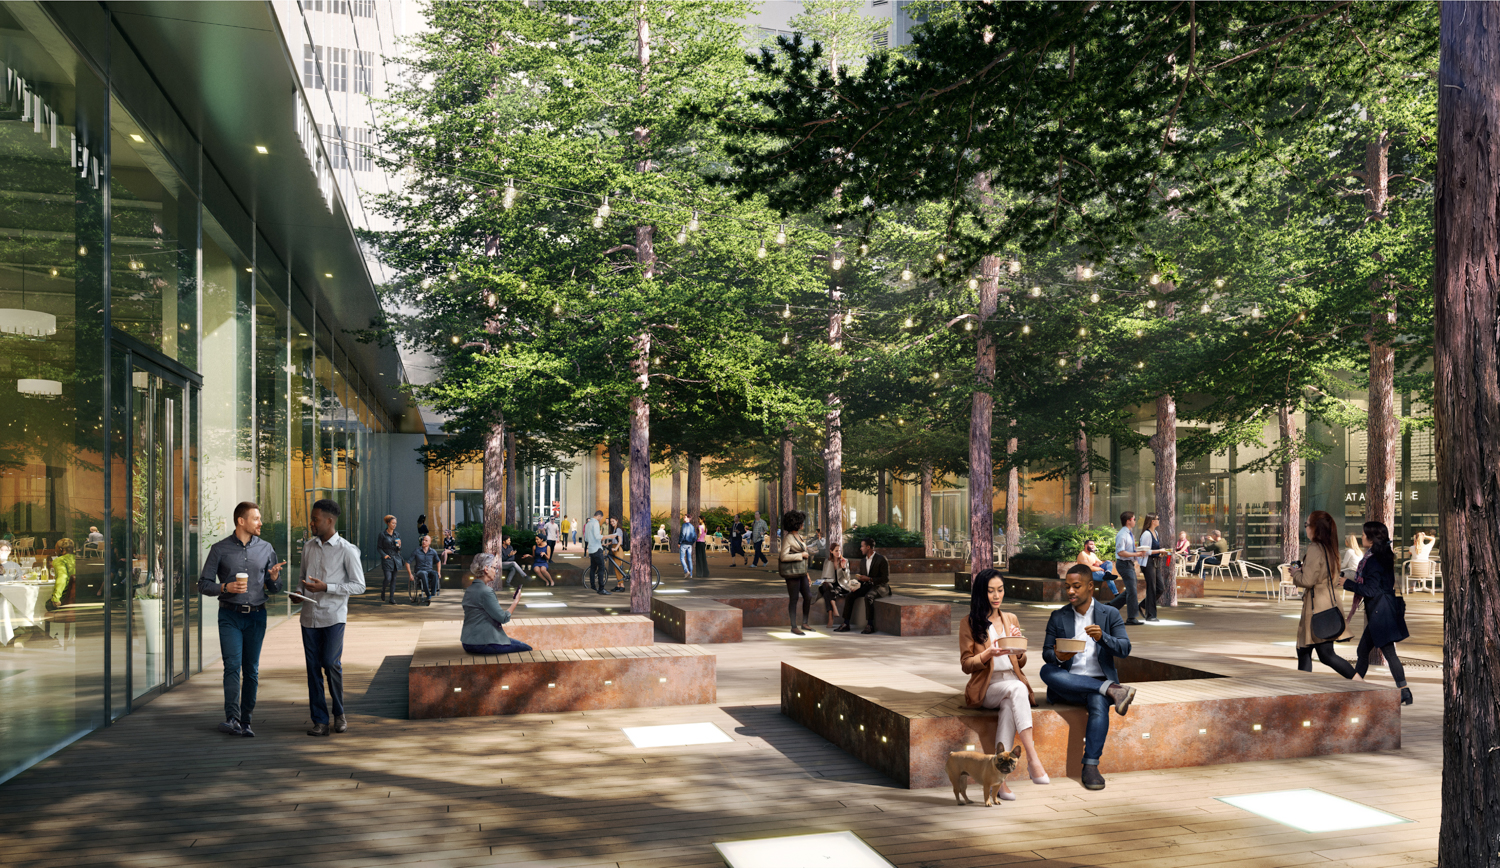 The City Grove ground-level retail space, design by PWP Landscape Architecture